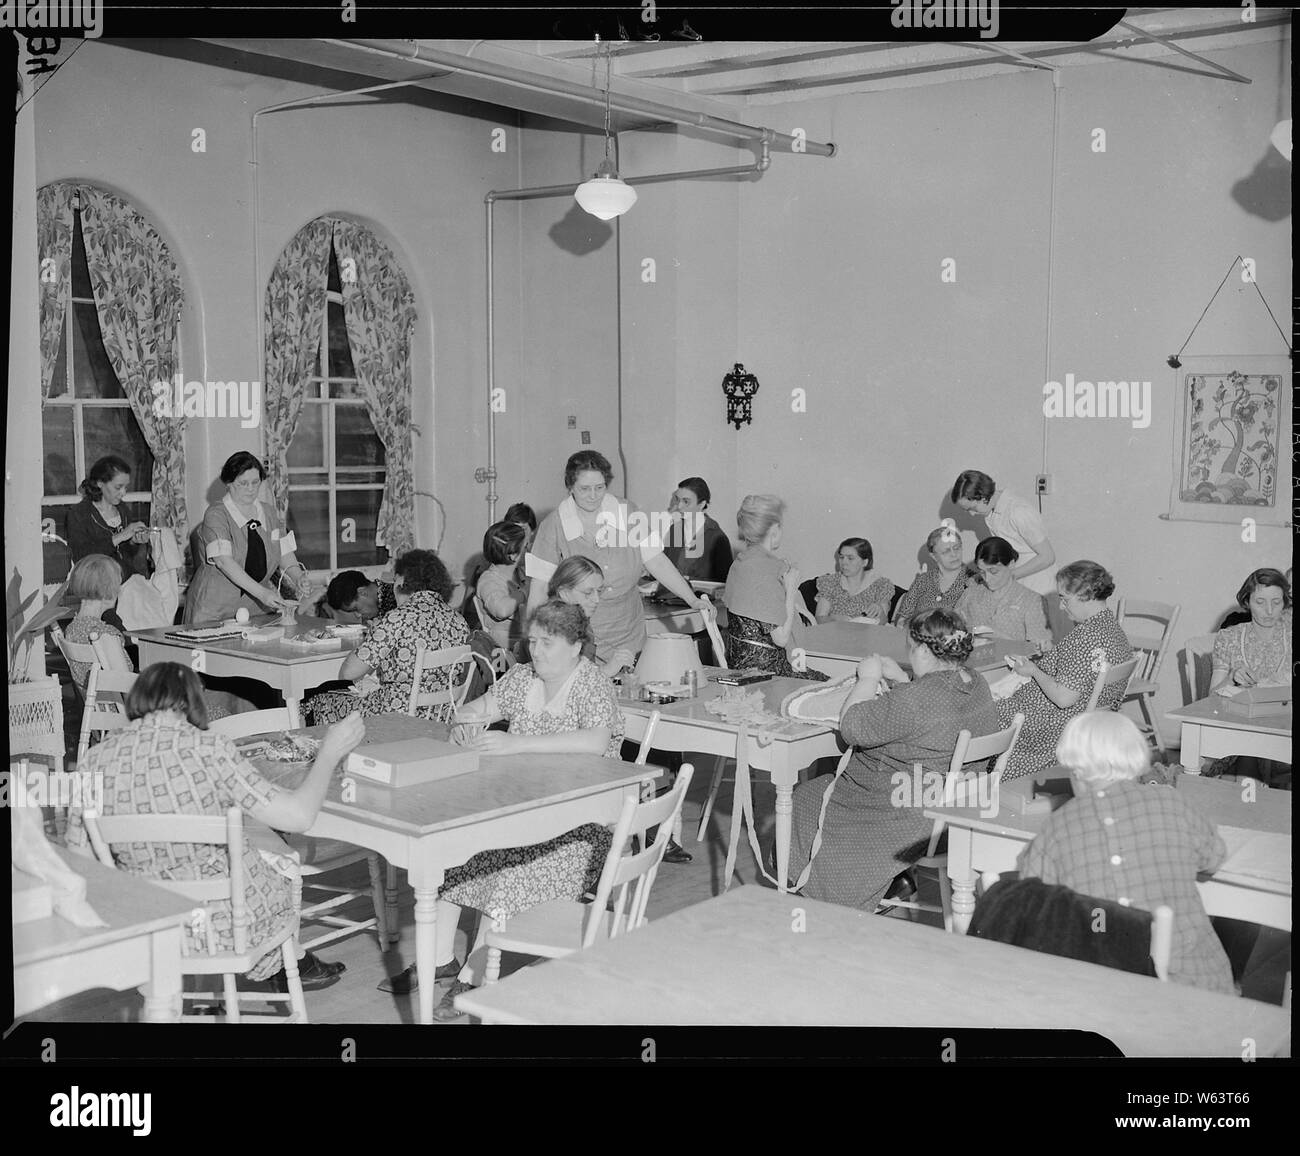 Columbus, Ohio. State Hospital. Here the Works Progress Administration (WPA) has a large number of workers who assist in occupational and recreational therapy for patients of the hospital. Photo shows Works Progress Administration women attendants assisting in occupational therapy with the women patients. Stock Photo